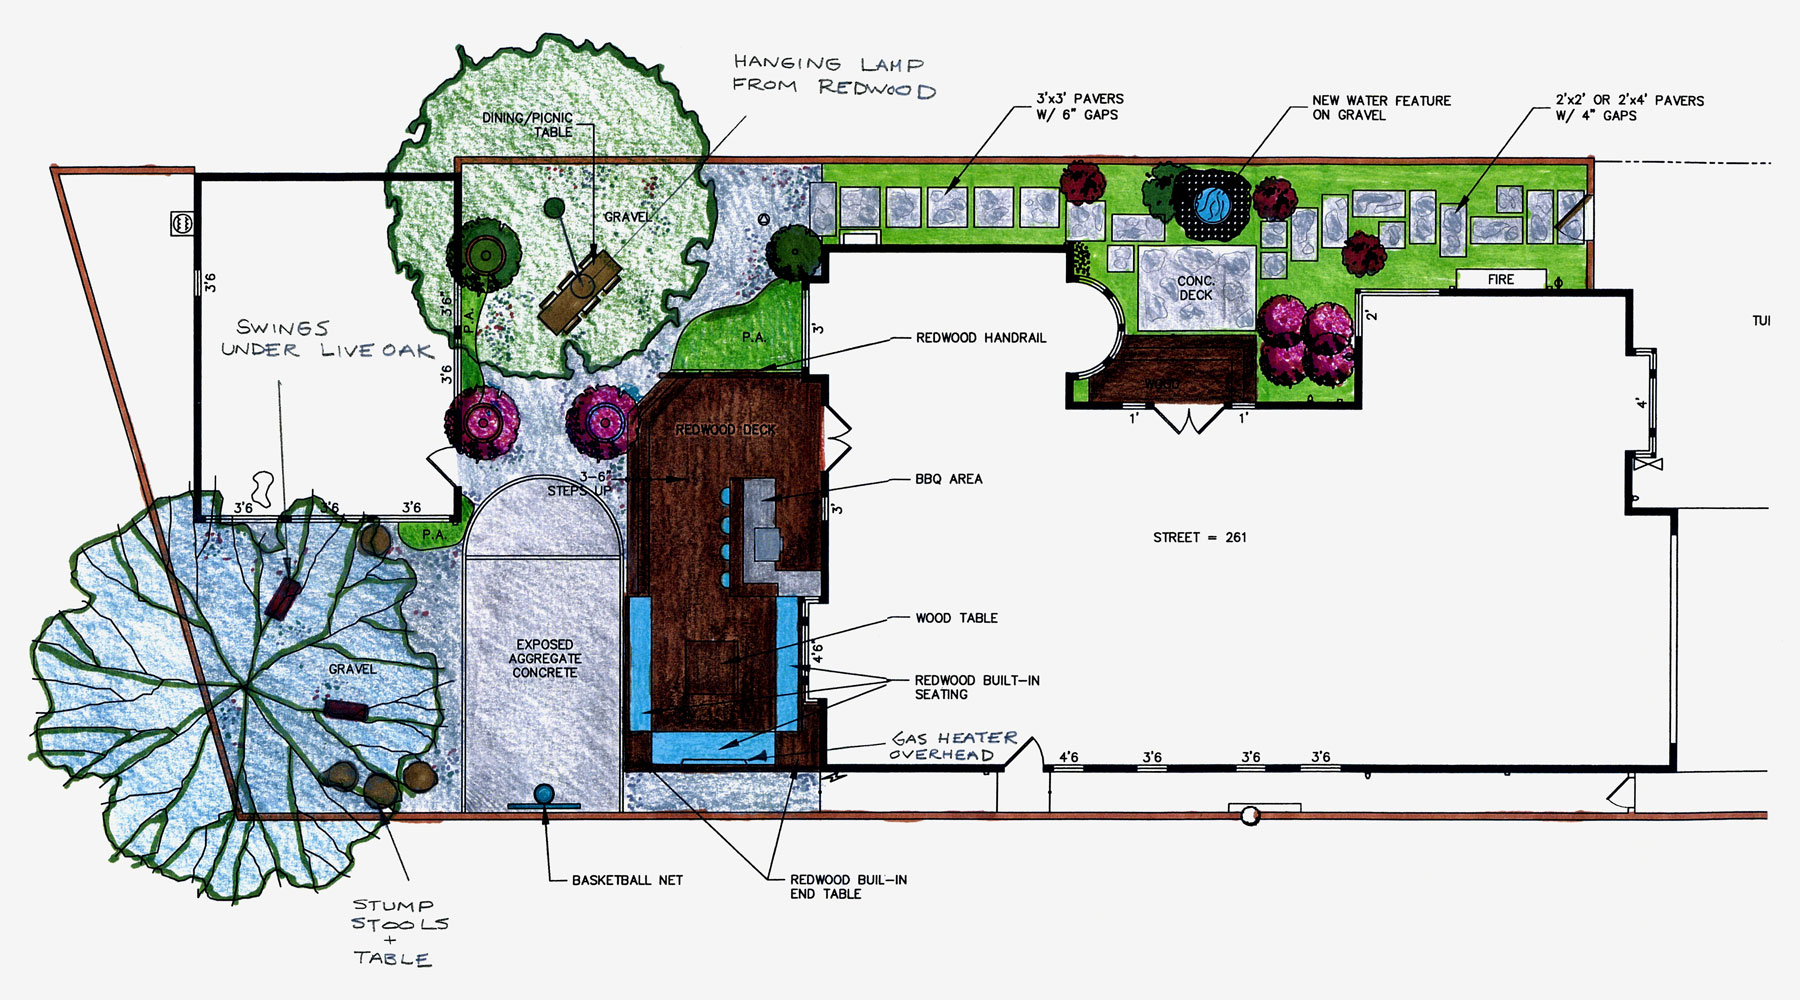 Project design sketch for Canyon Family Playground